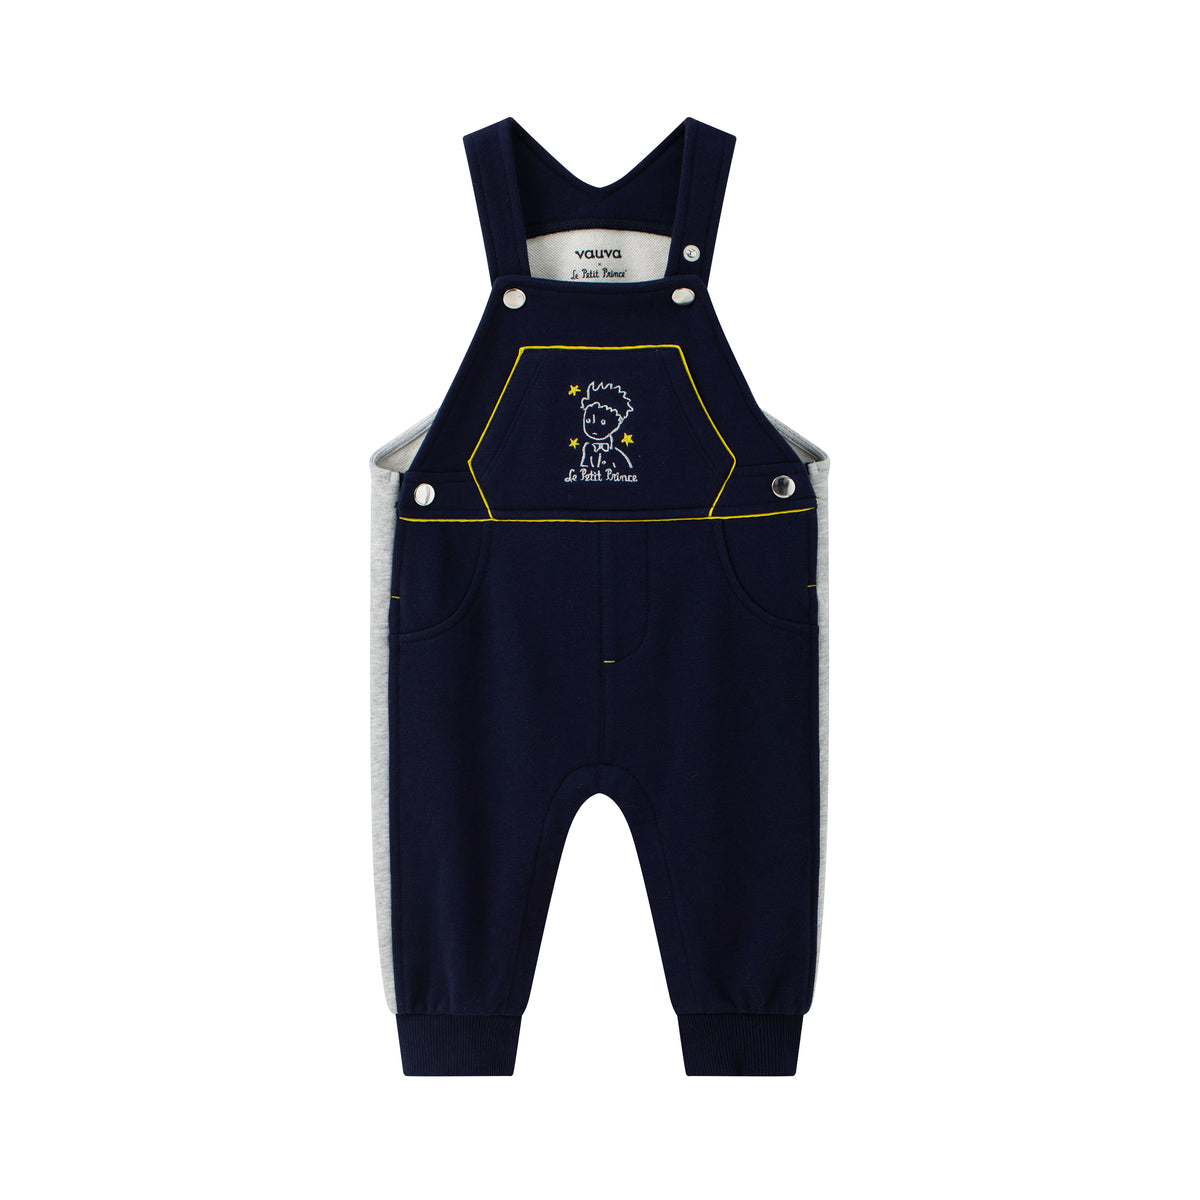 Vauva x Le Petit Prince - Baby 2 Pocket Romper product image front